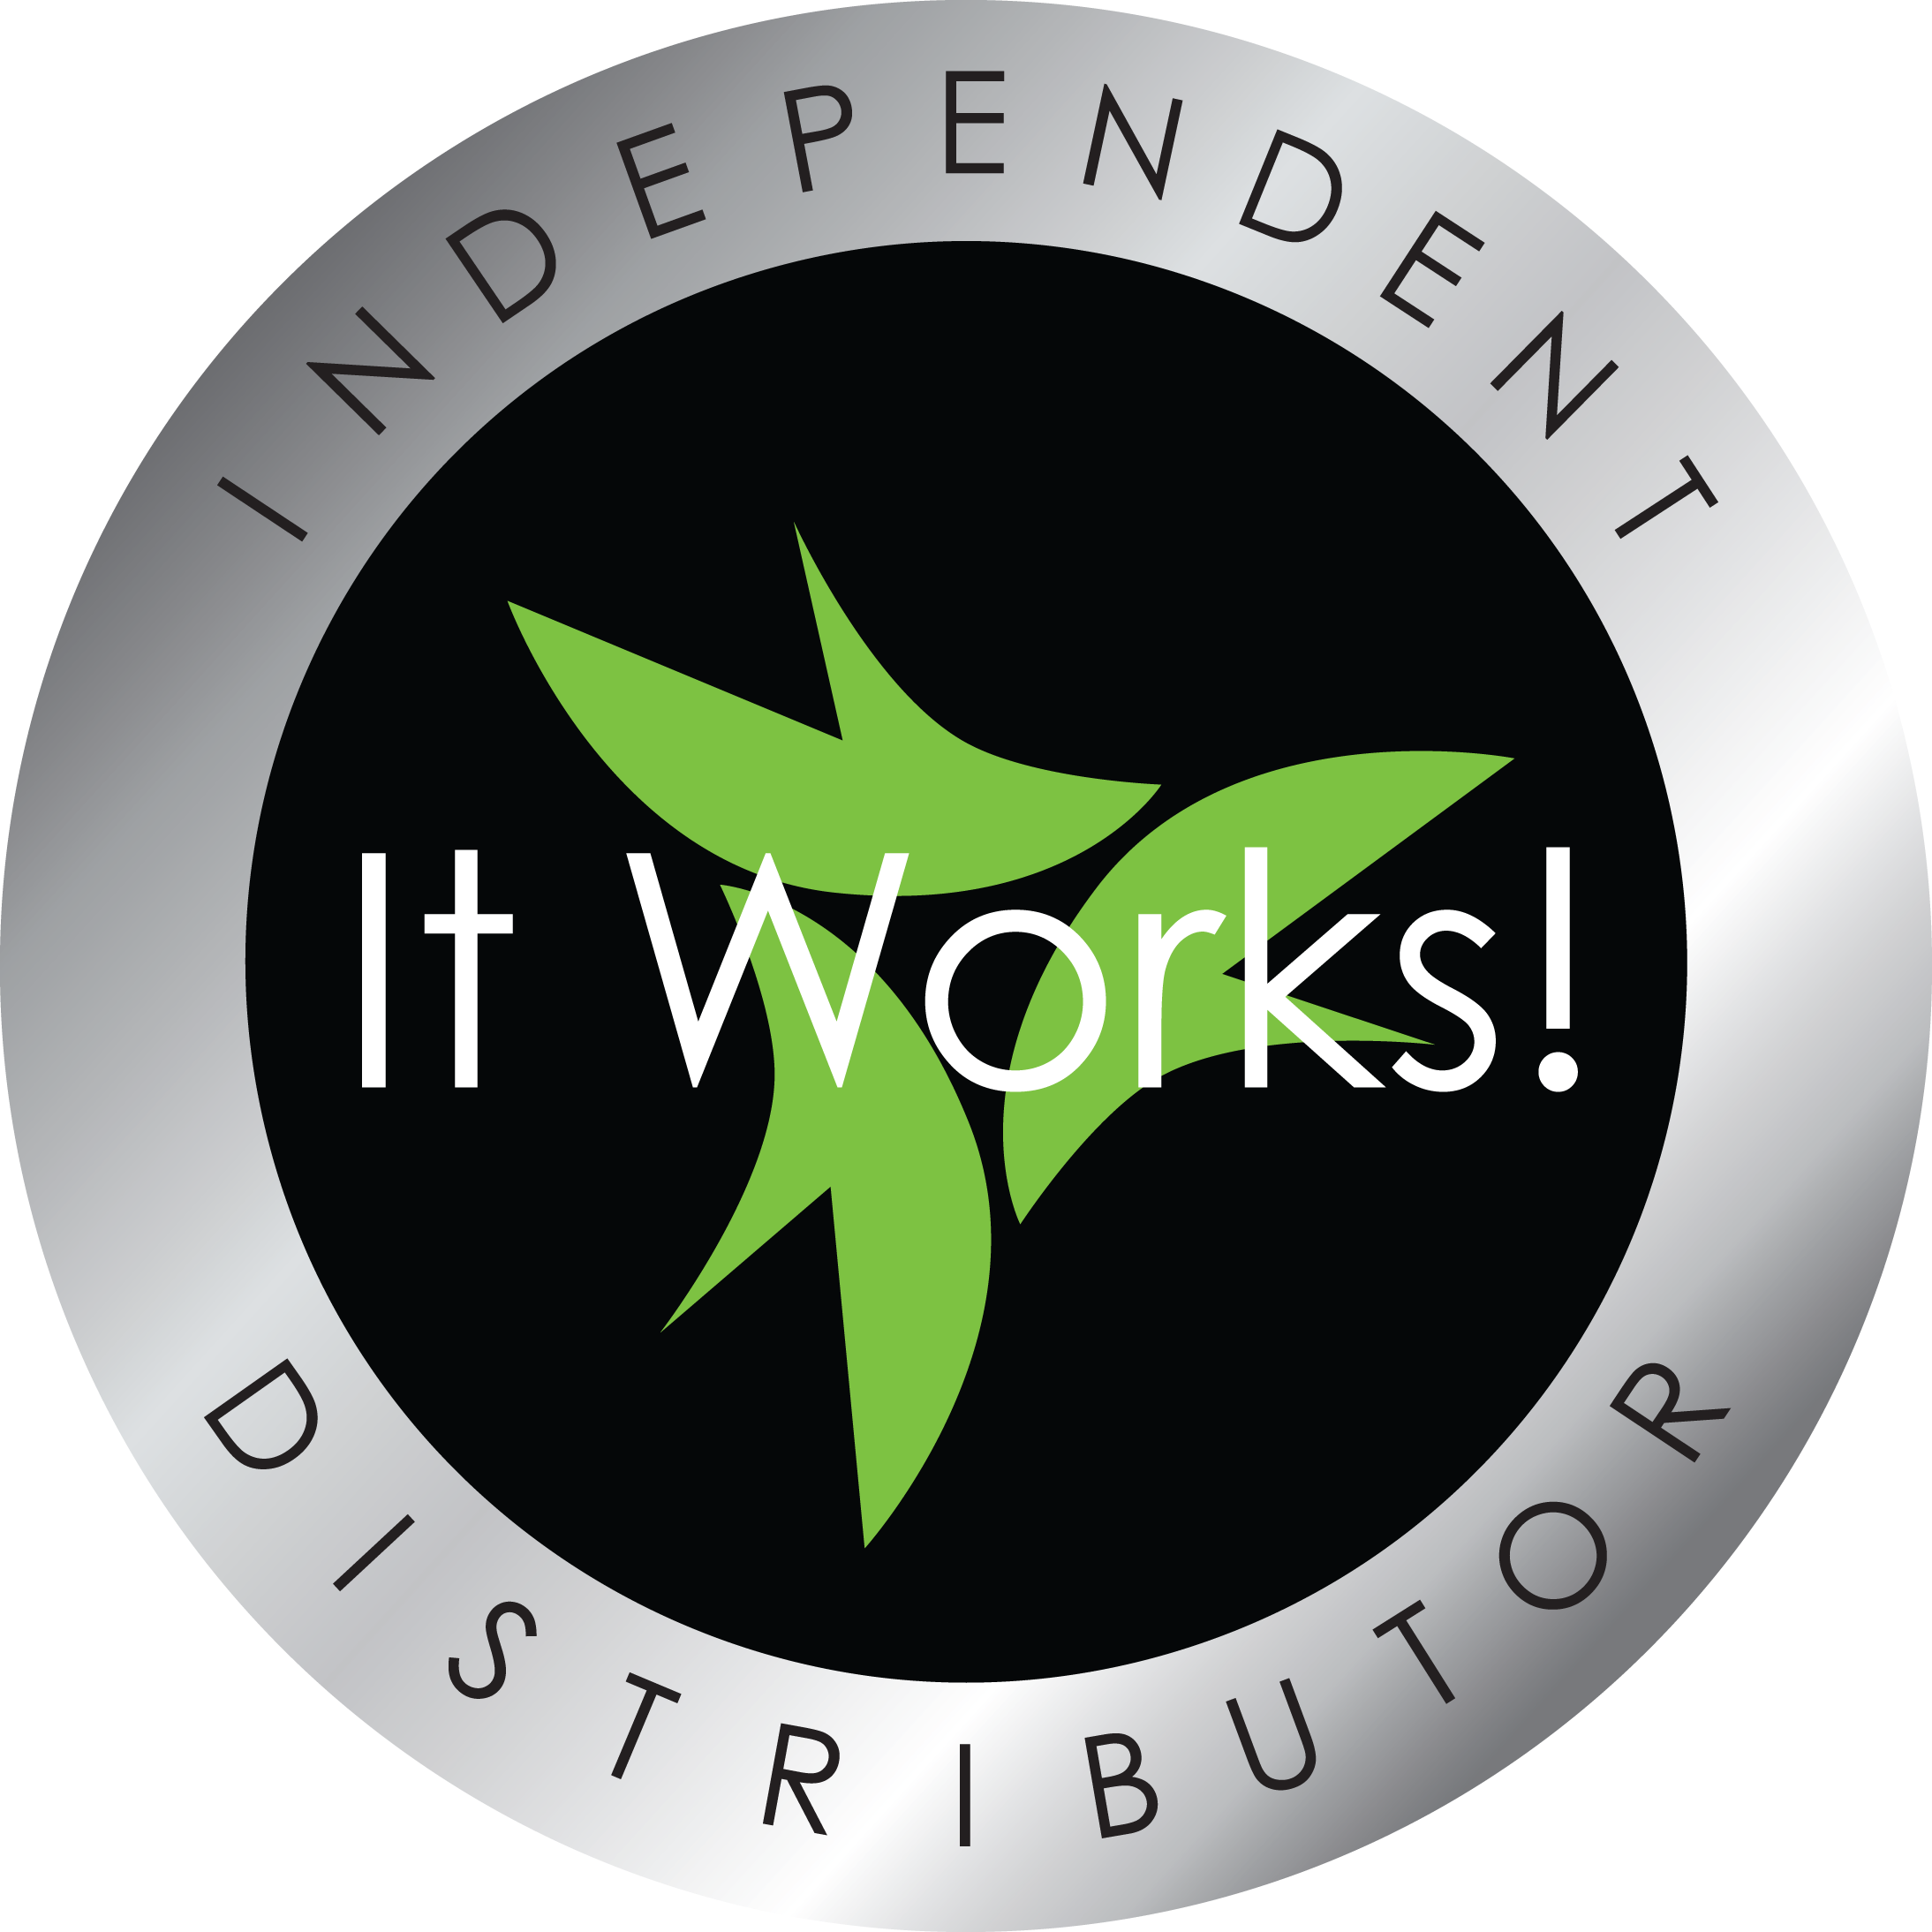 Distributor for my it works. http://t.co/lKEE7D66Yq Working to help people get that #beachbody